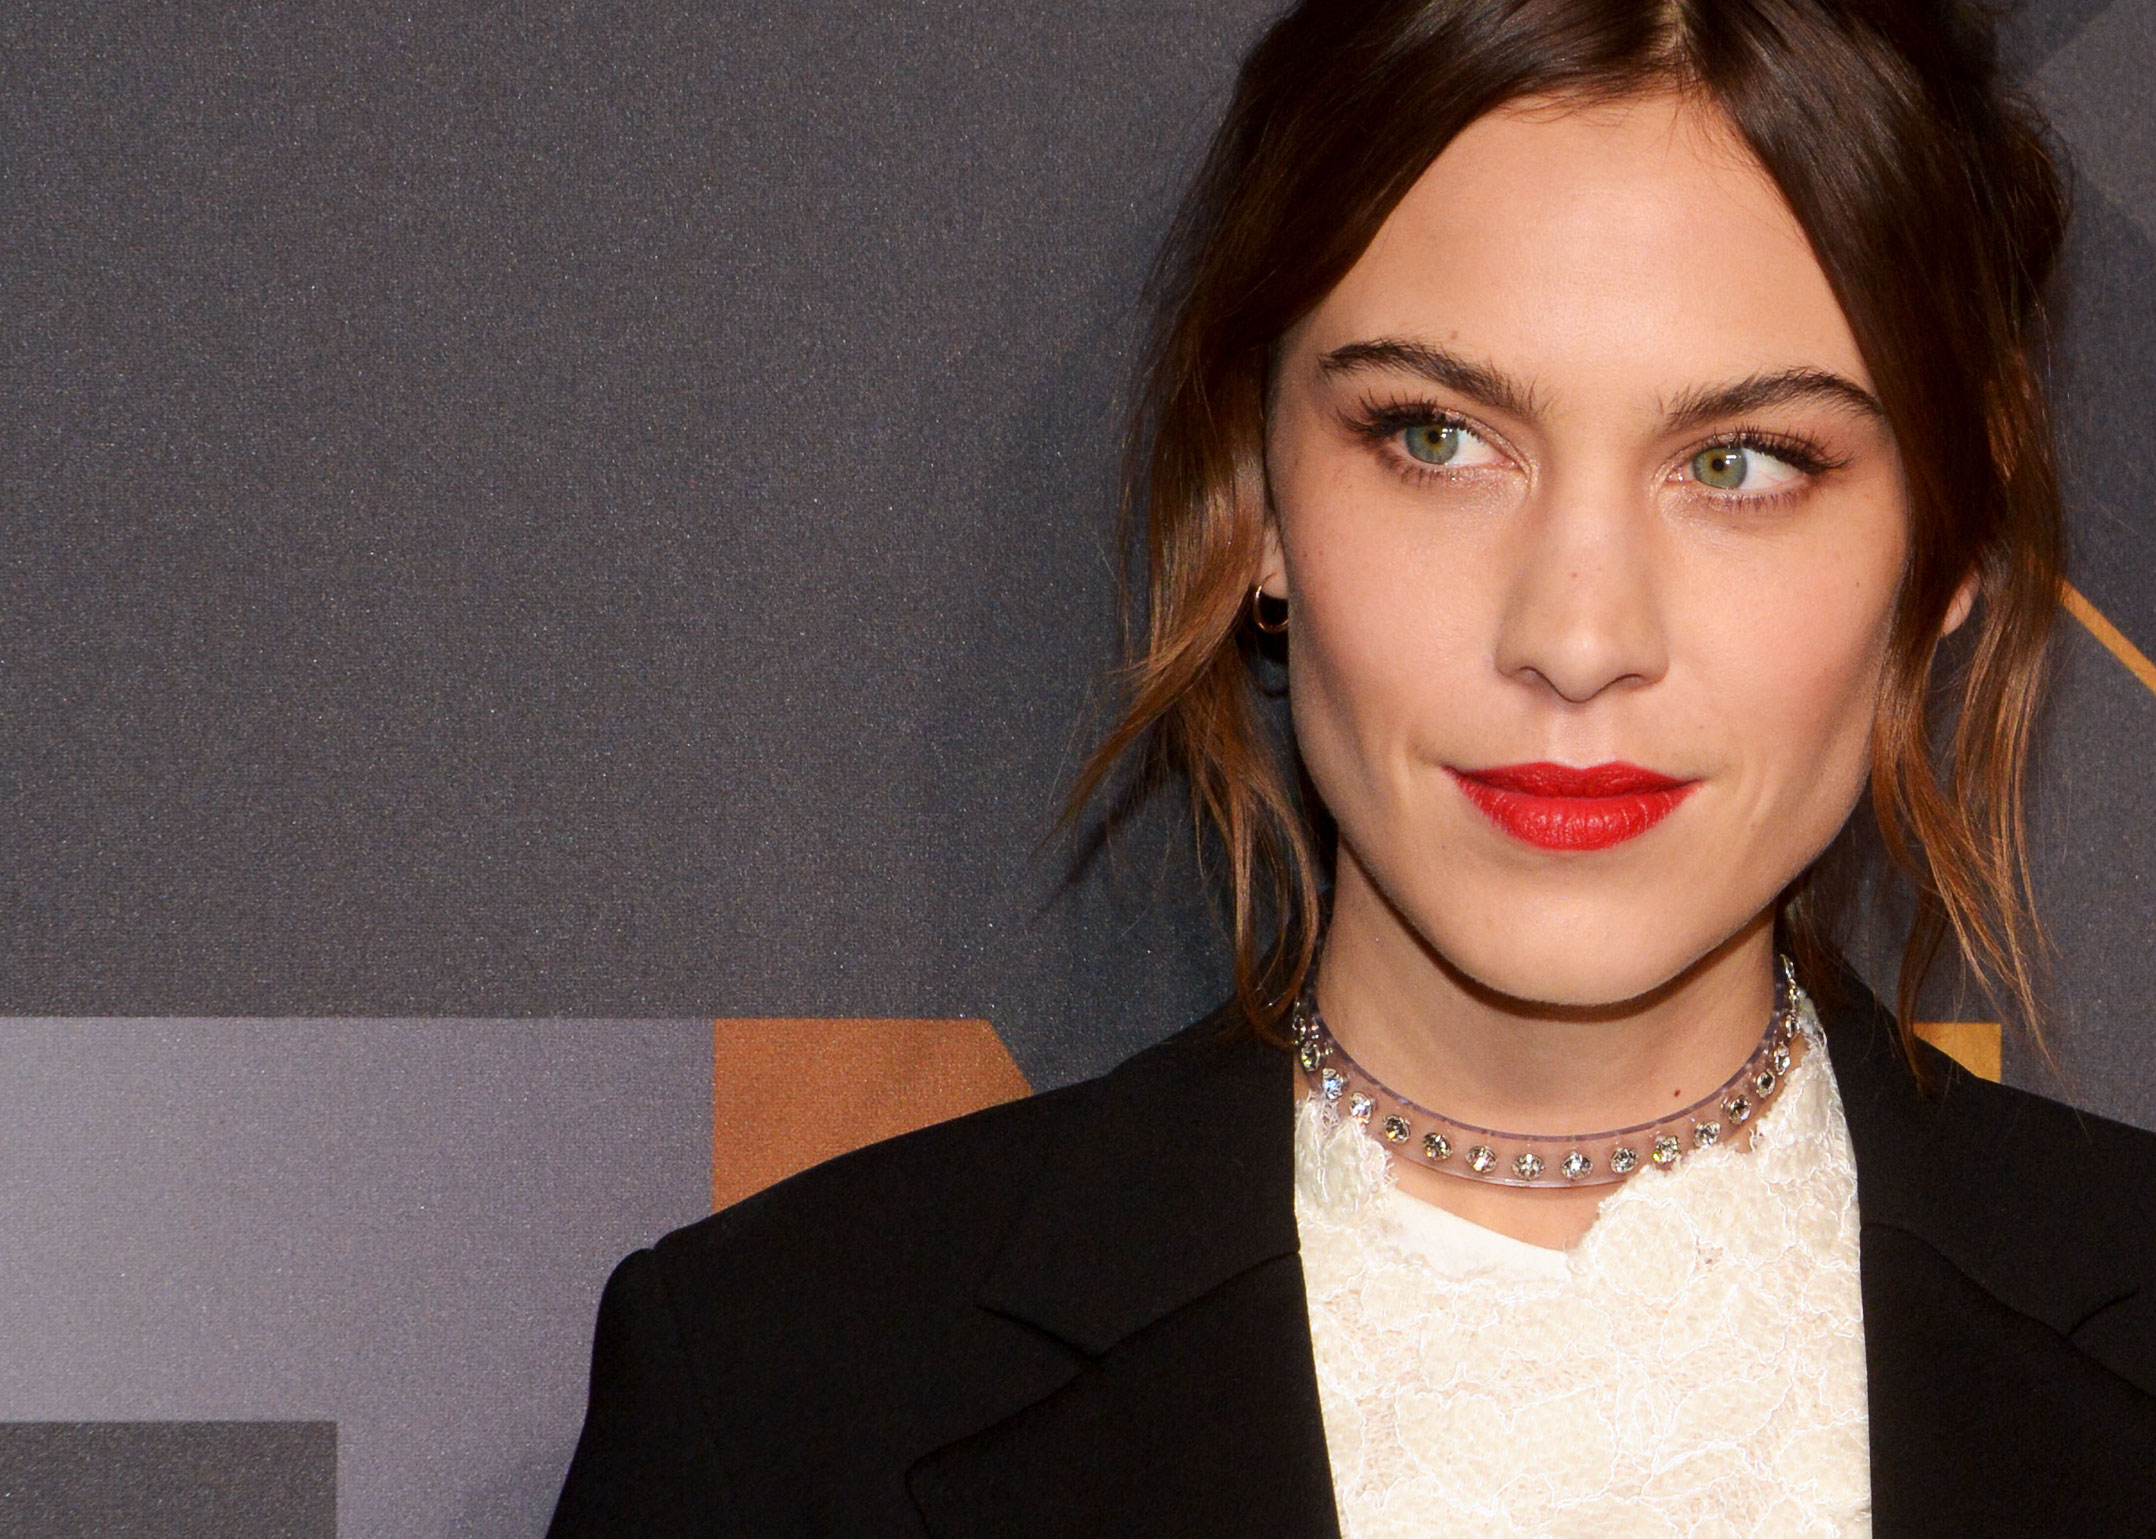 Alexa Chung Joins M&S's Rowe to Fix Chain's Fashion Woes: Chart - Bloomberg